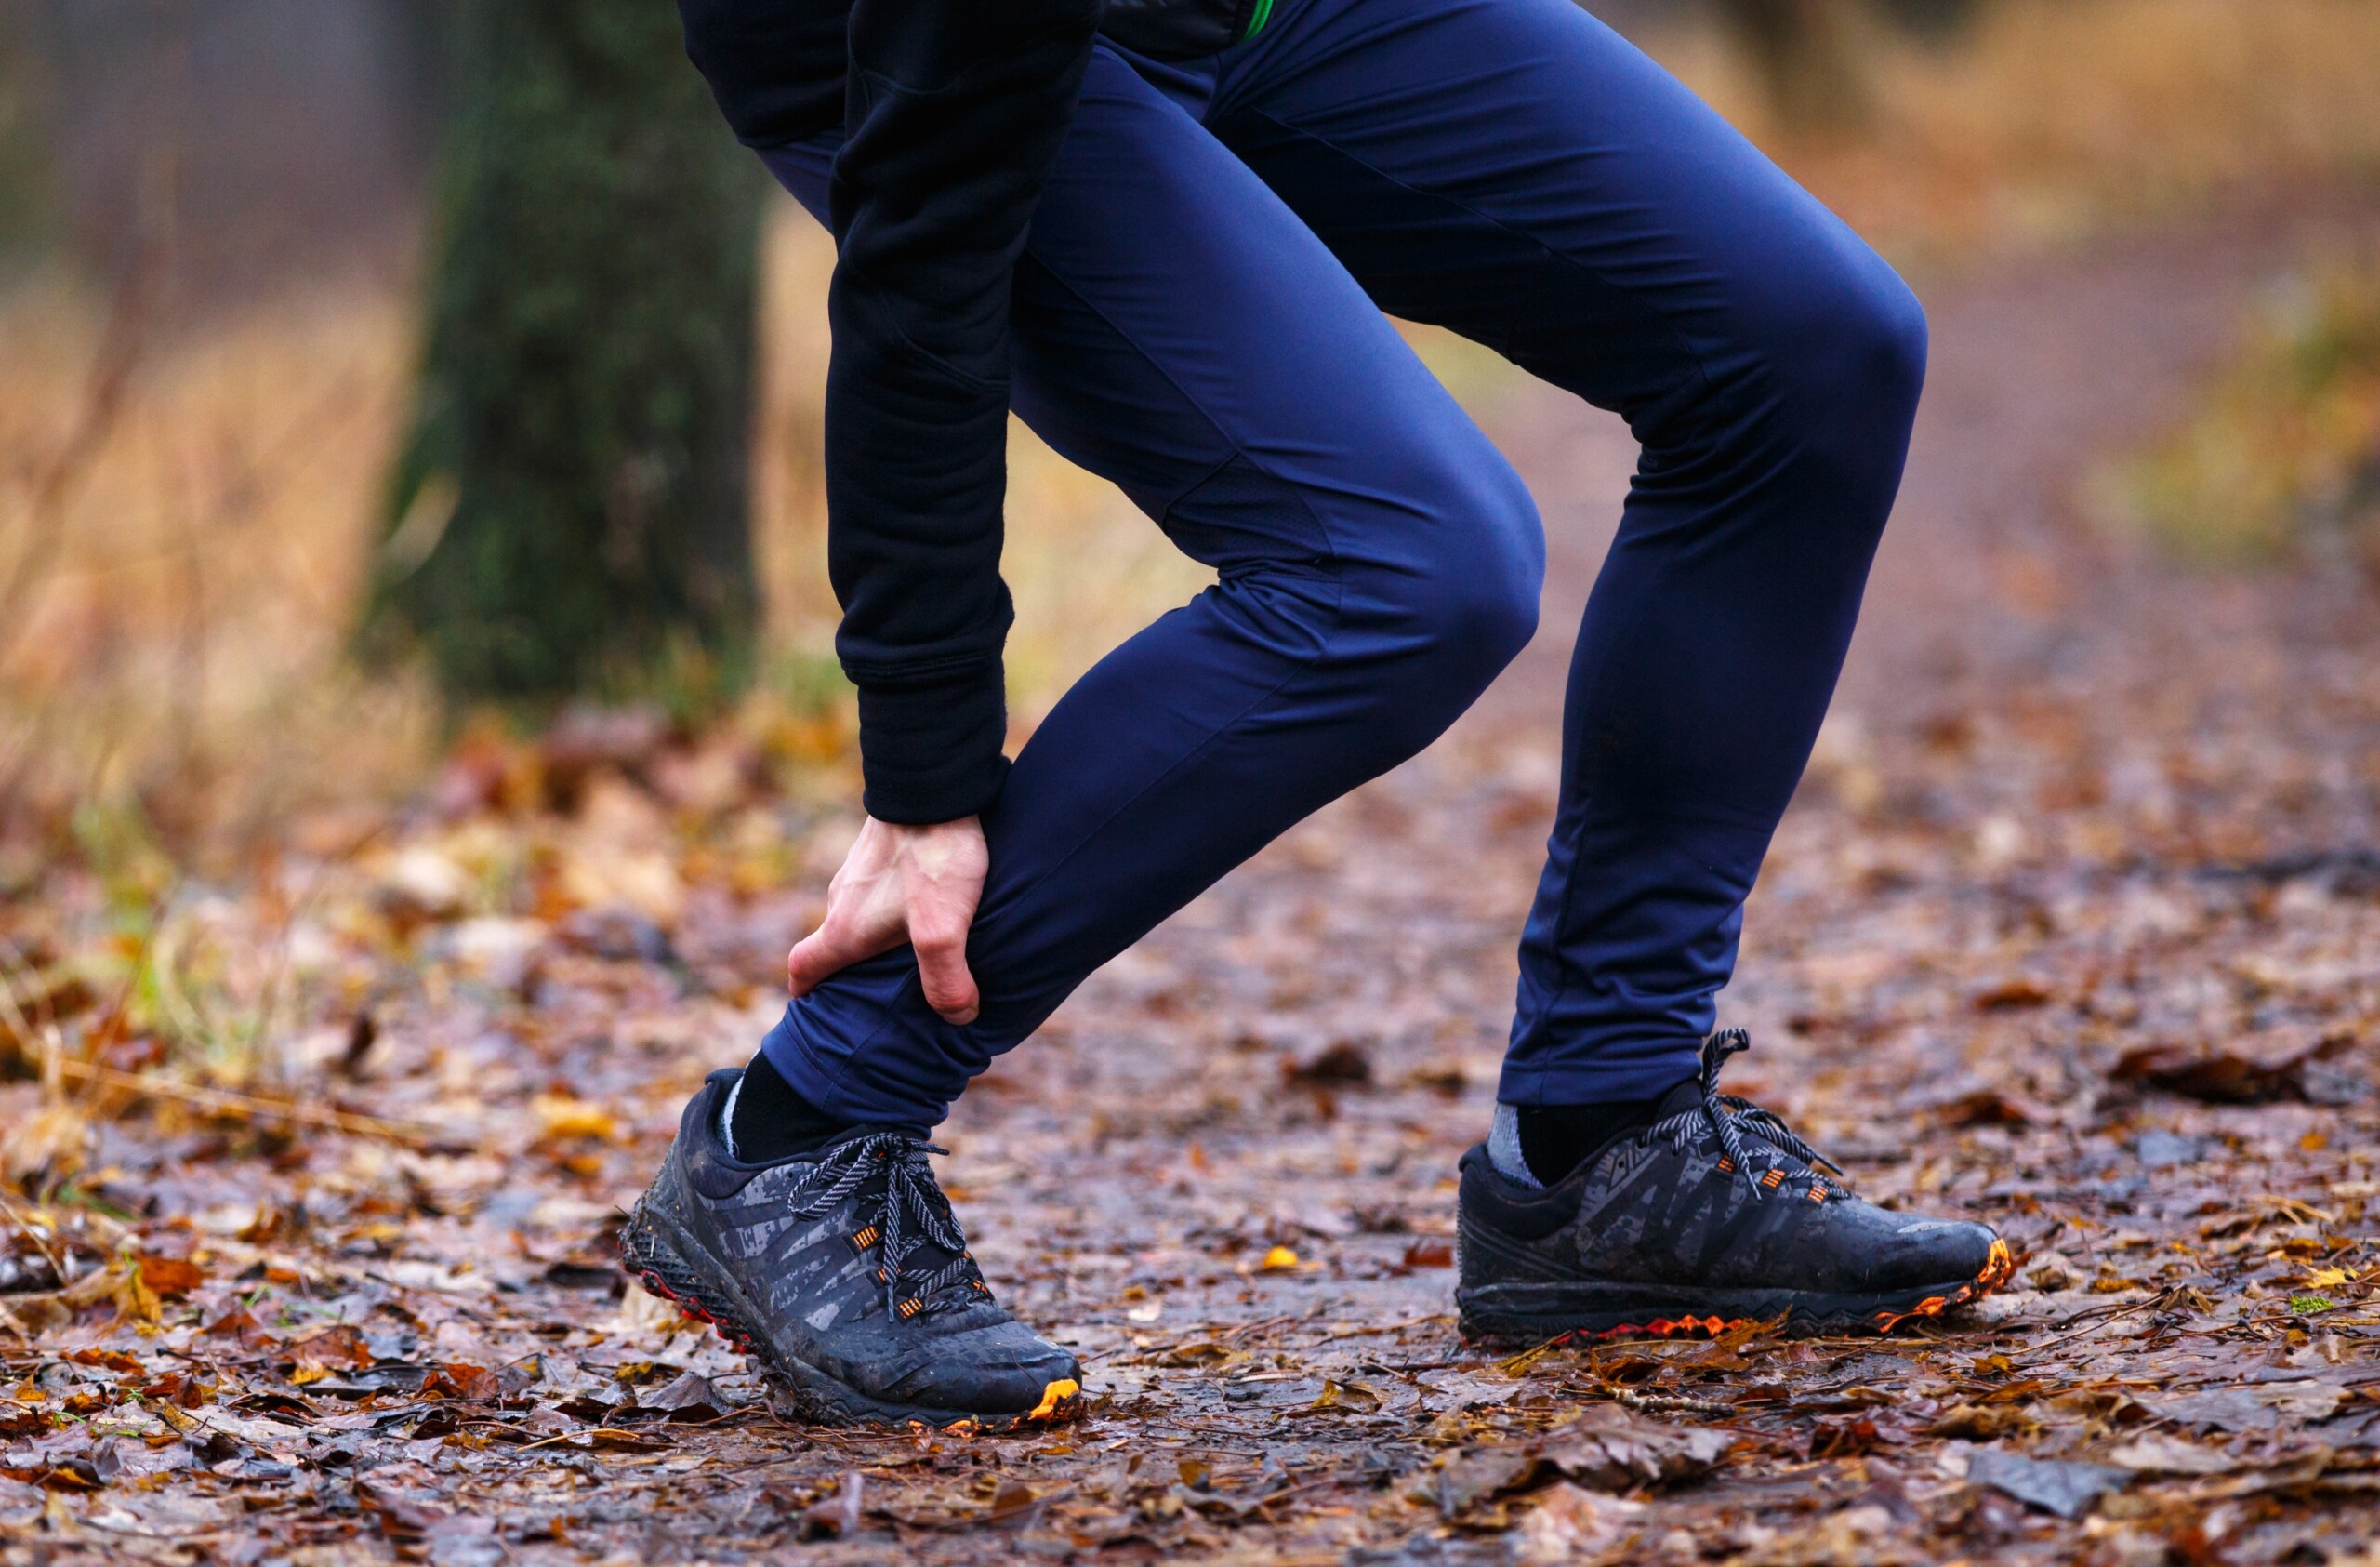 Ankle Sprain Prevention Tips for Runners and Walkers